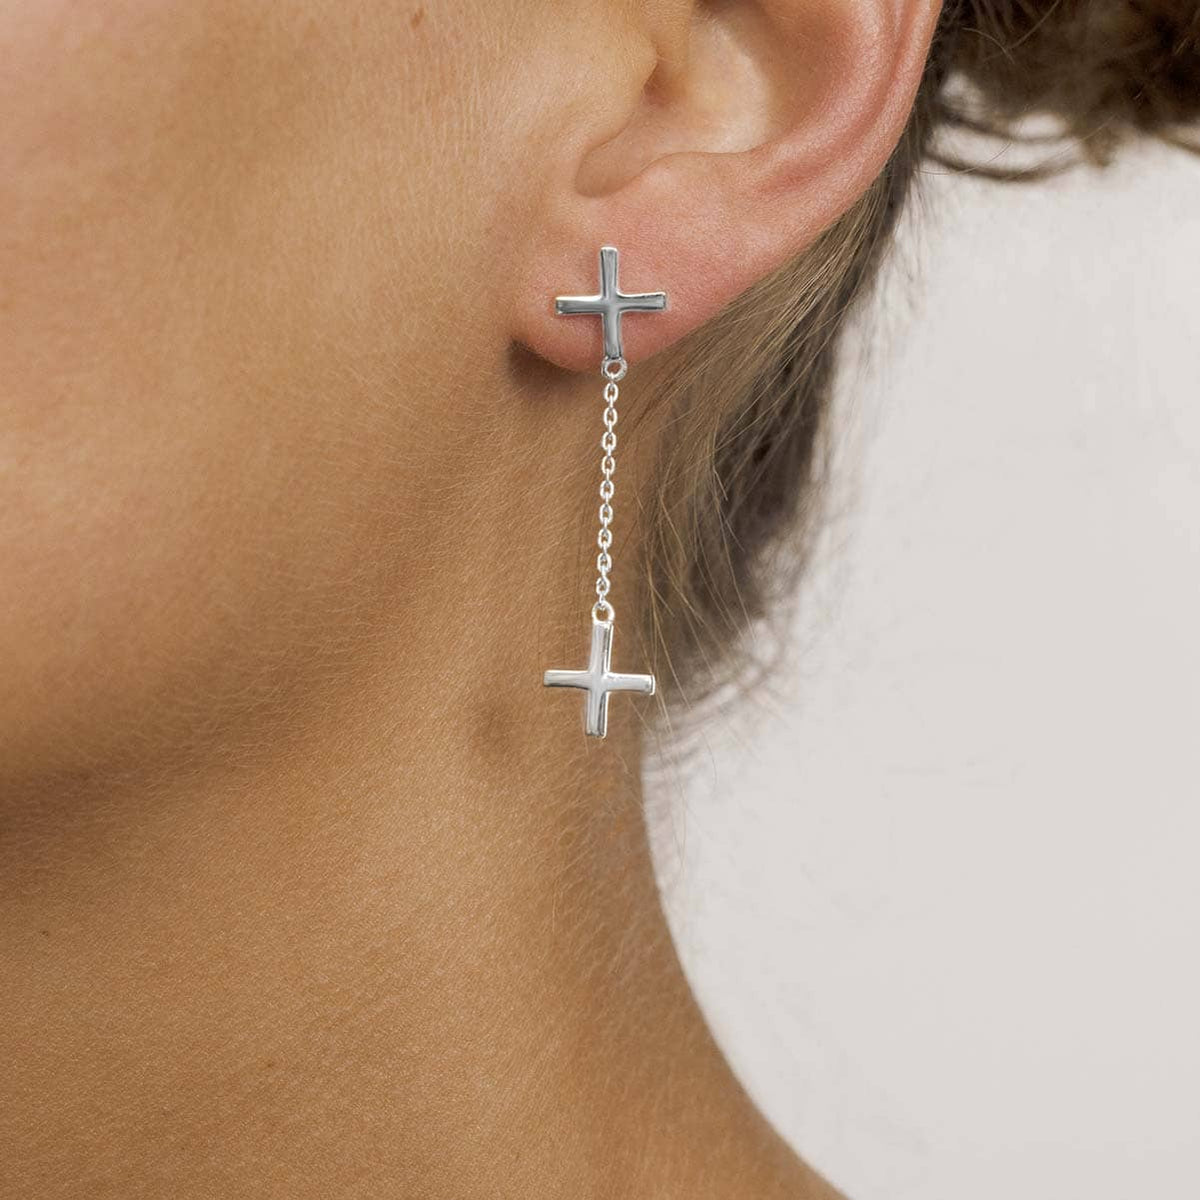 Long earrings with cross and chains